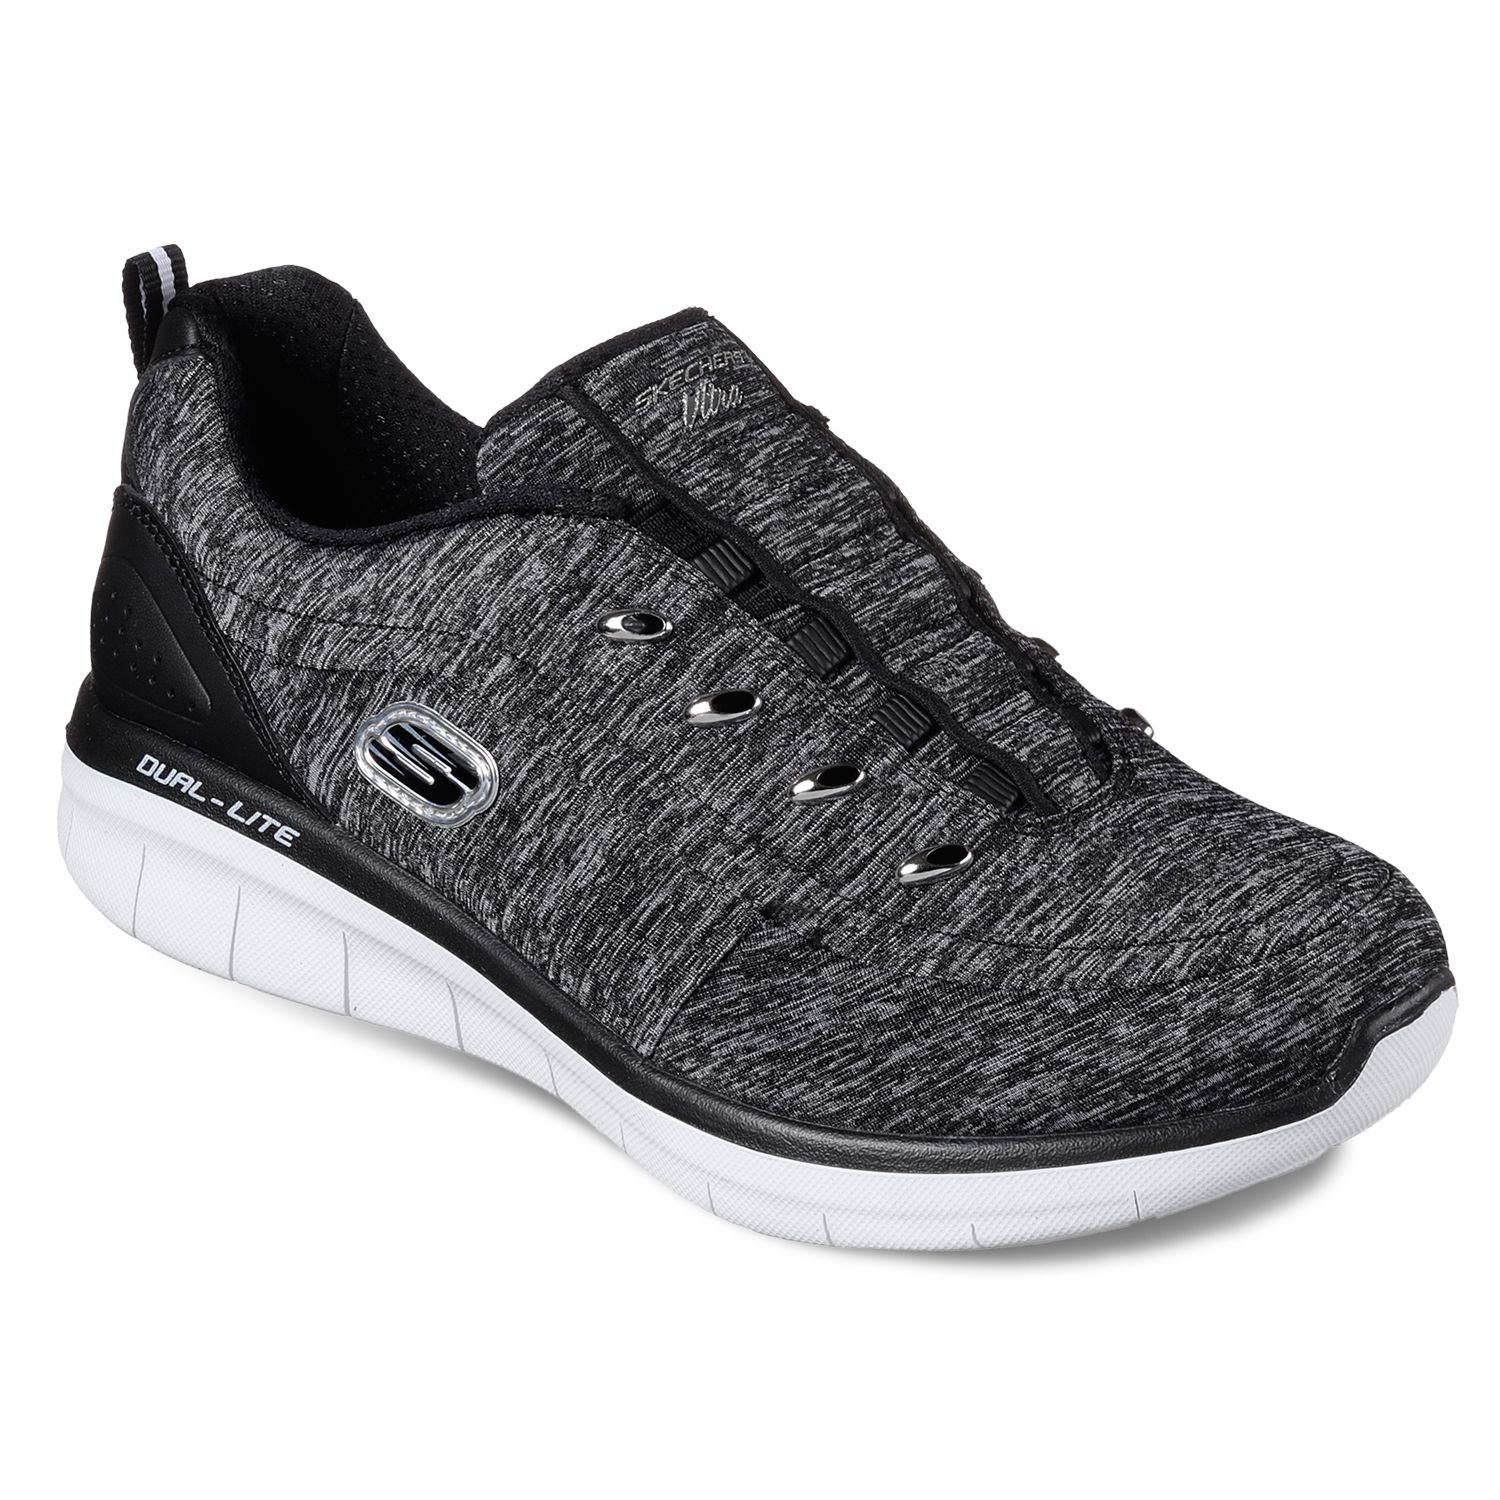 Skechers Synergy 2.0 Scouted Women's 